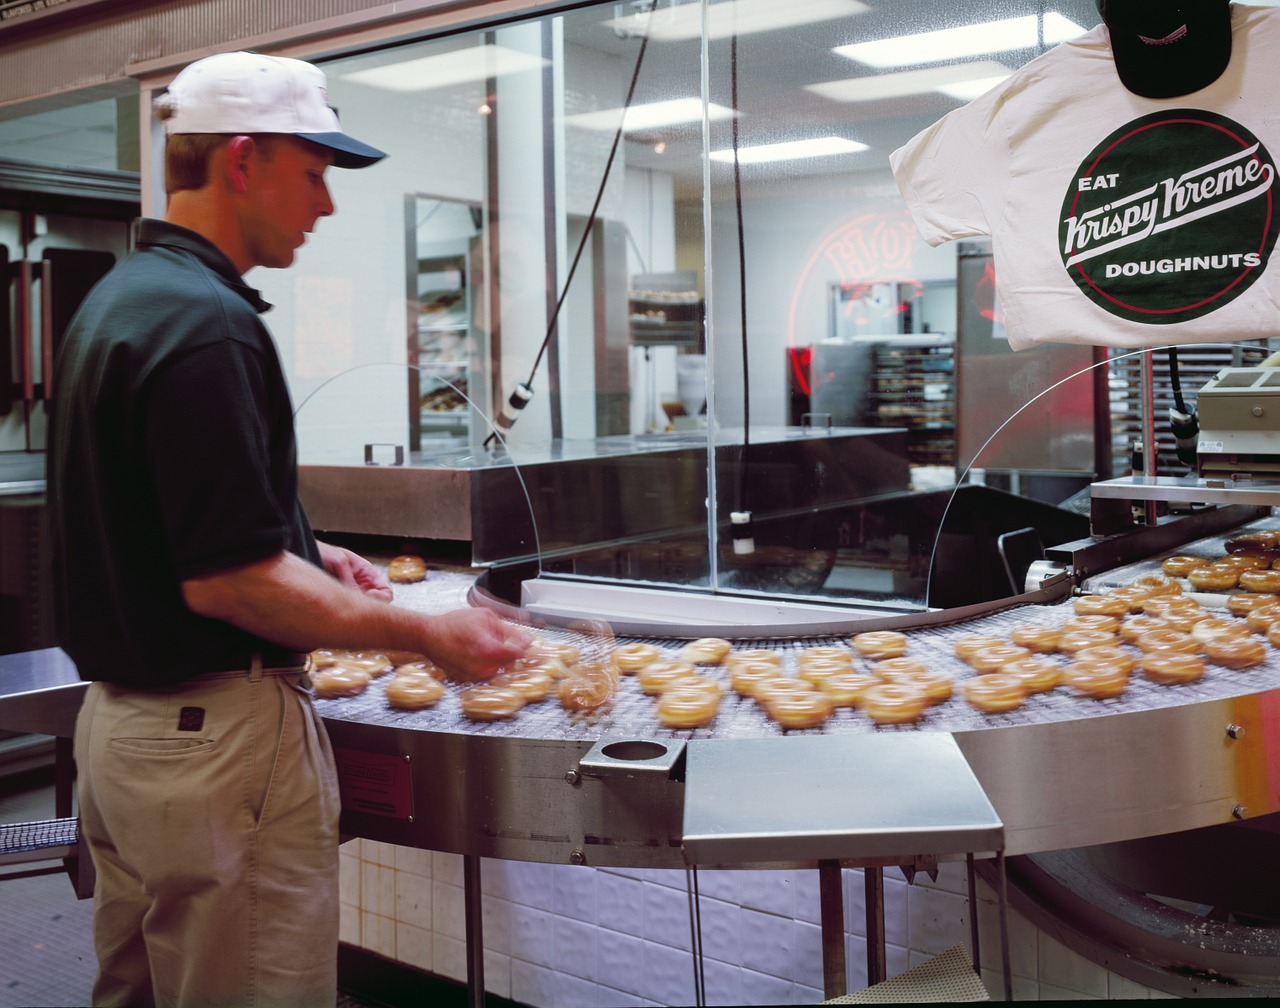 doughnut maker cooking donuts free photo